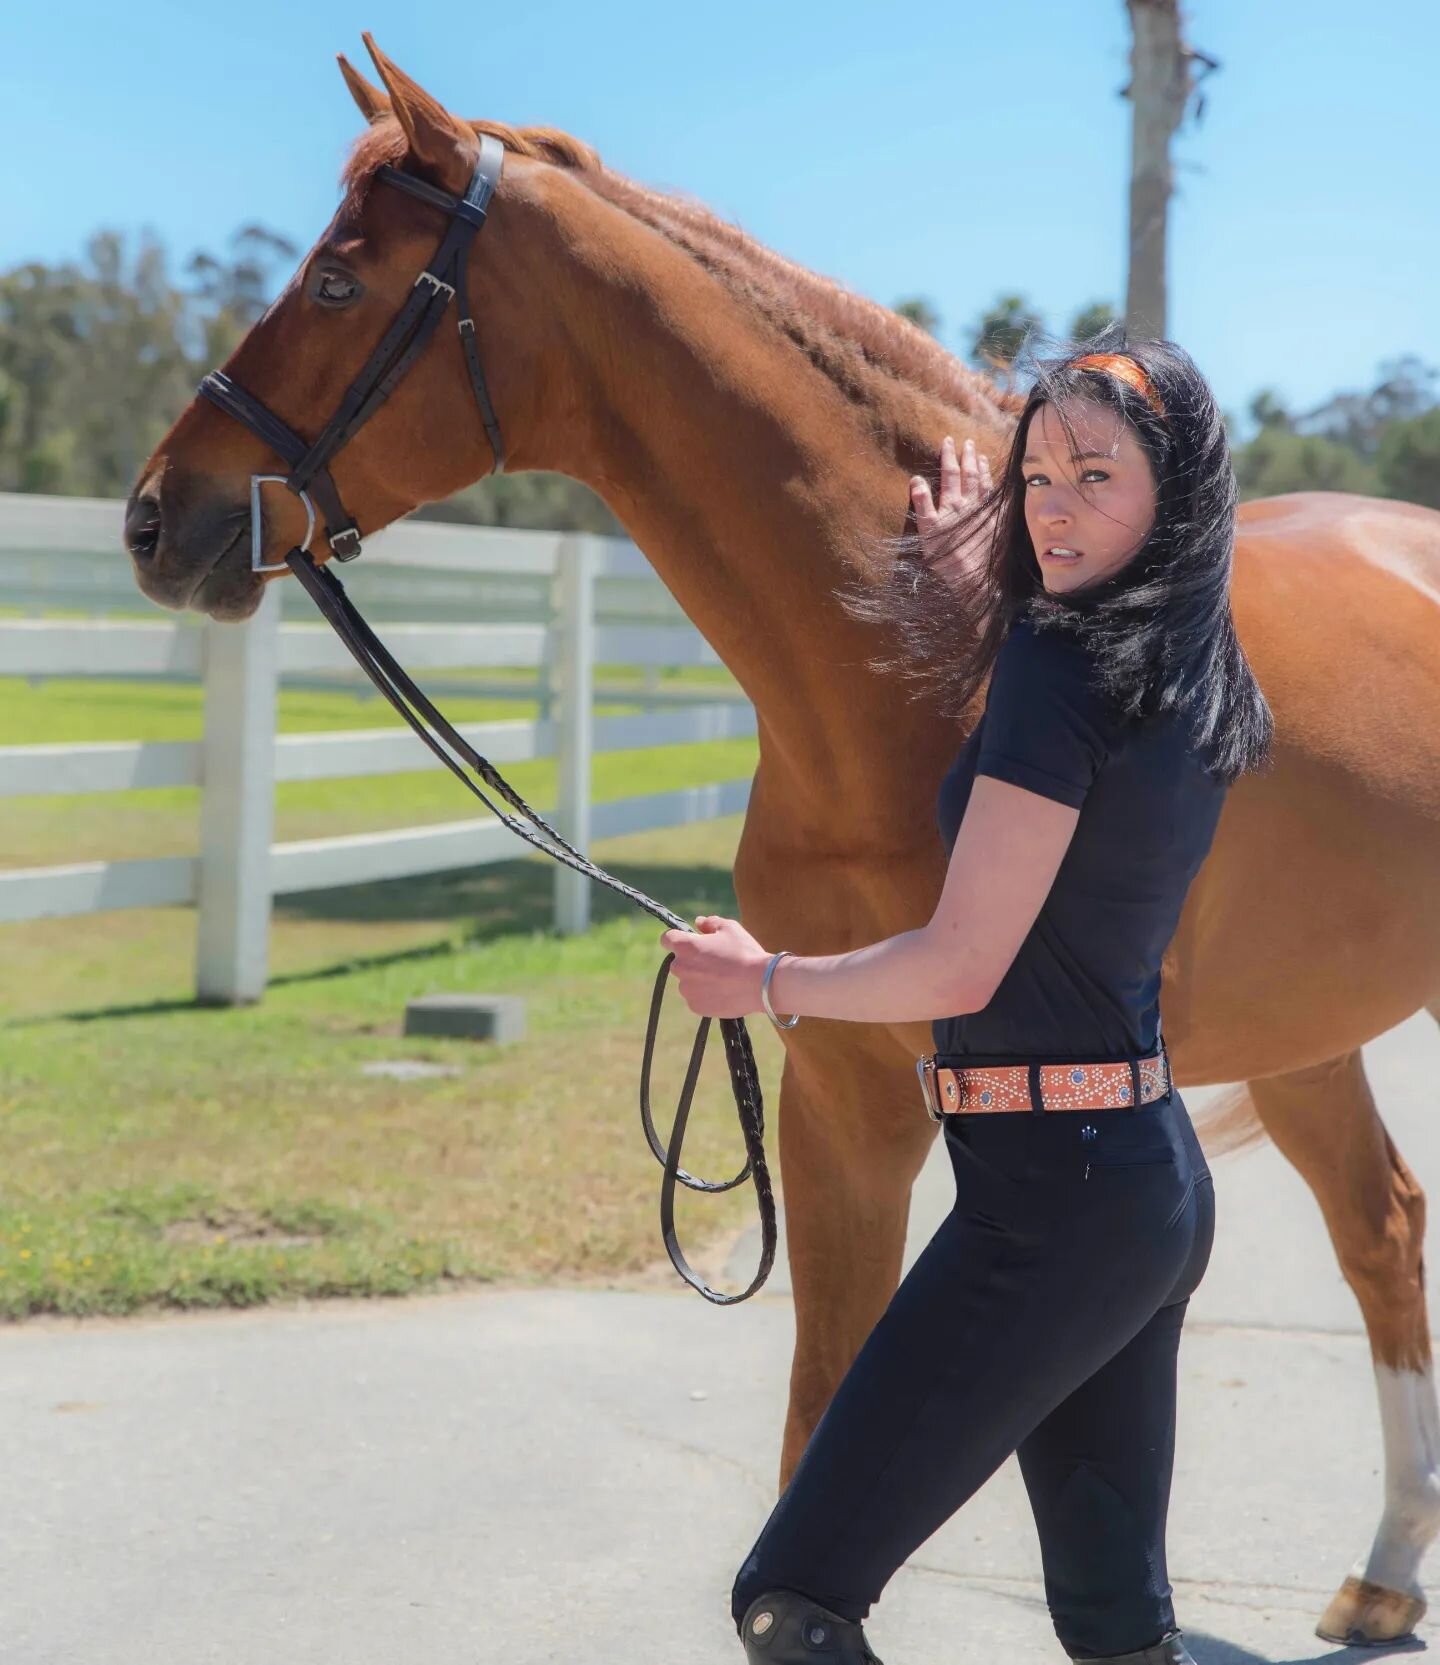 Last chance for 30% off during our Memorial Day Sale ☀️! 

Don't miss out on our new Collection of Italian-made breeches, designed with comfort, style and innovation 🇮🇹. 

Sale ends tonight 🗓️ Save on breeches, tops, belts &amp; bags! Use discount